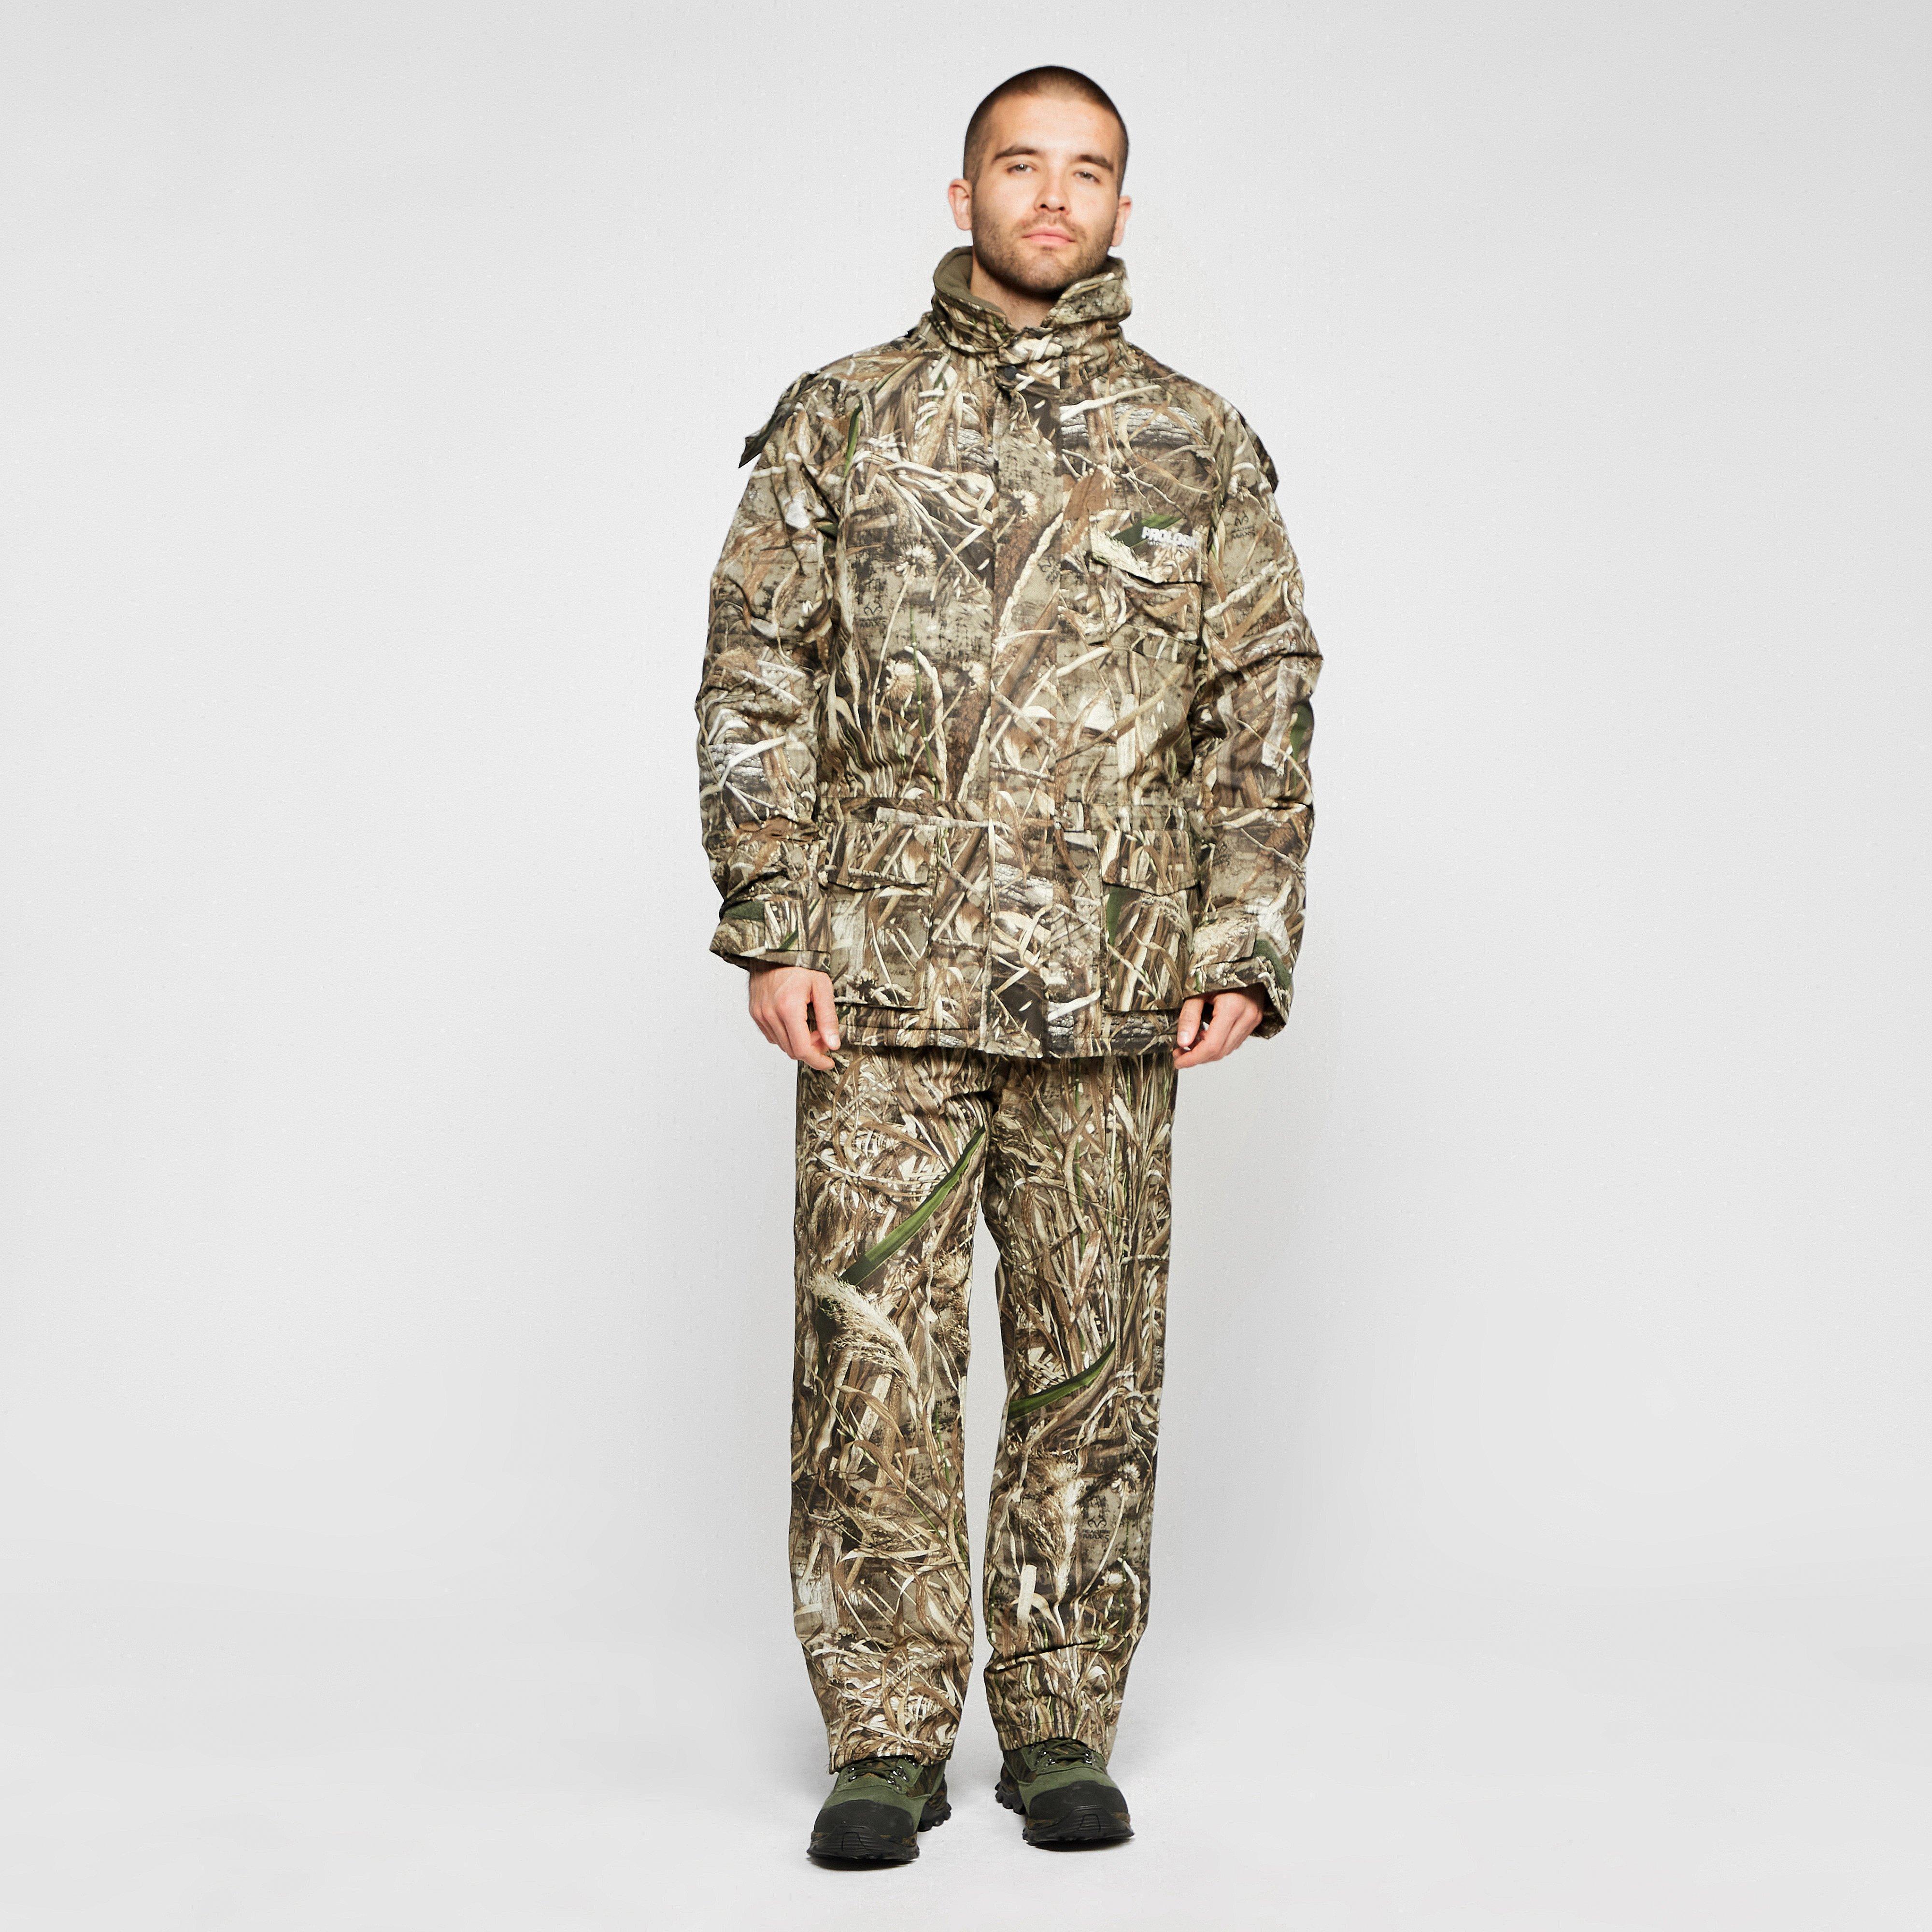  PROLOGIC Comfort Thermo Suit (MAX5 Camo, 2 PCS), Green